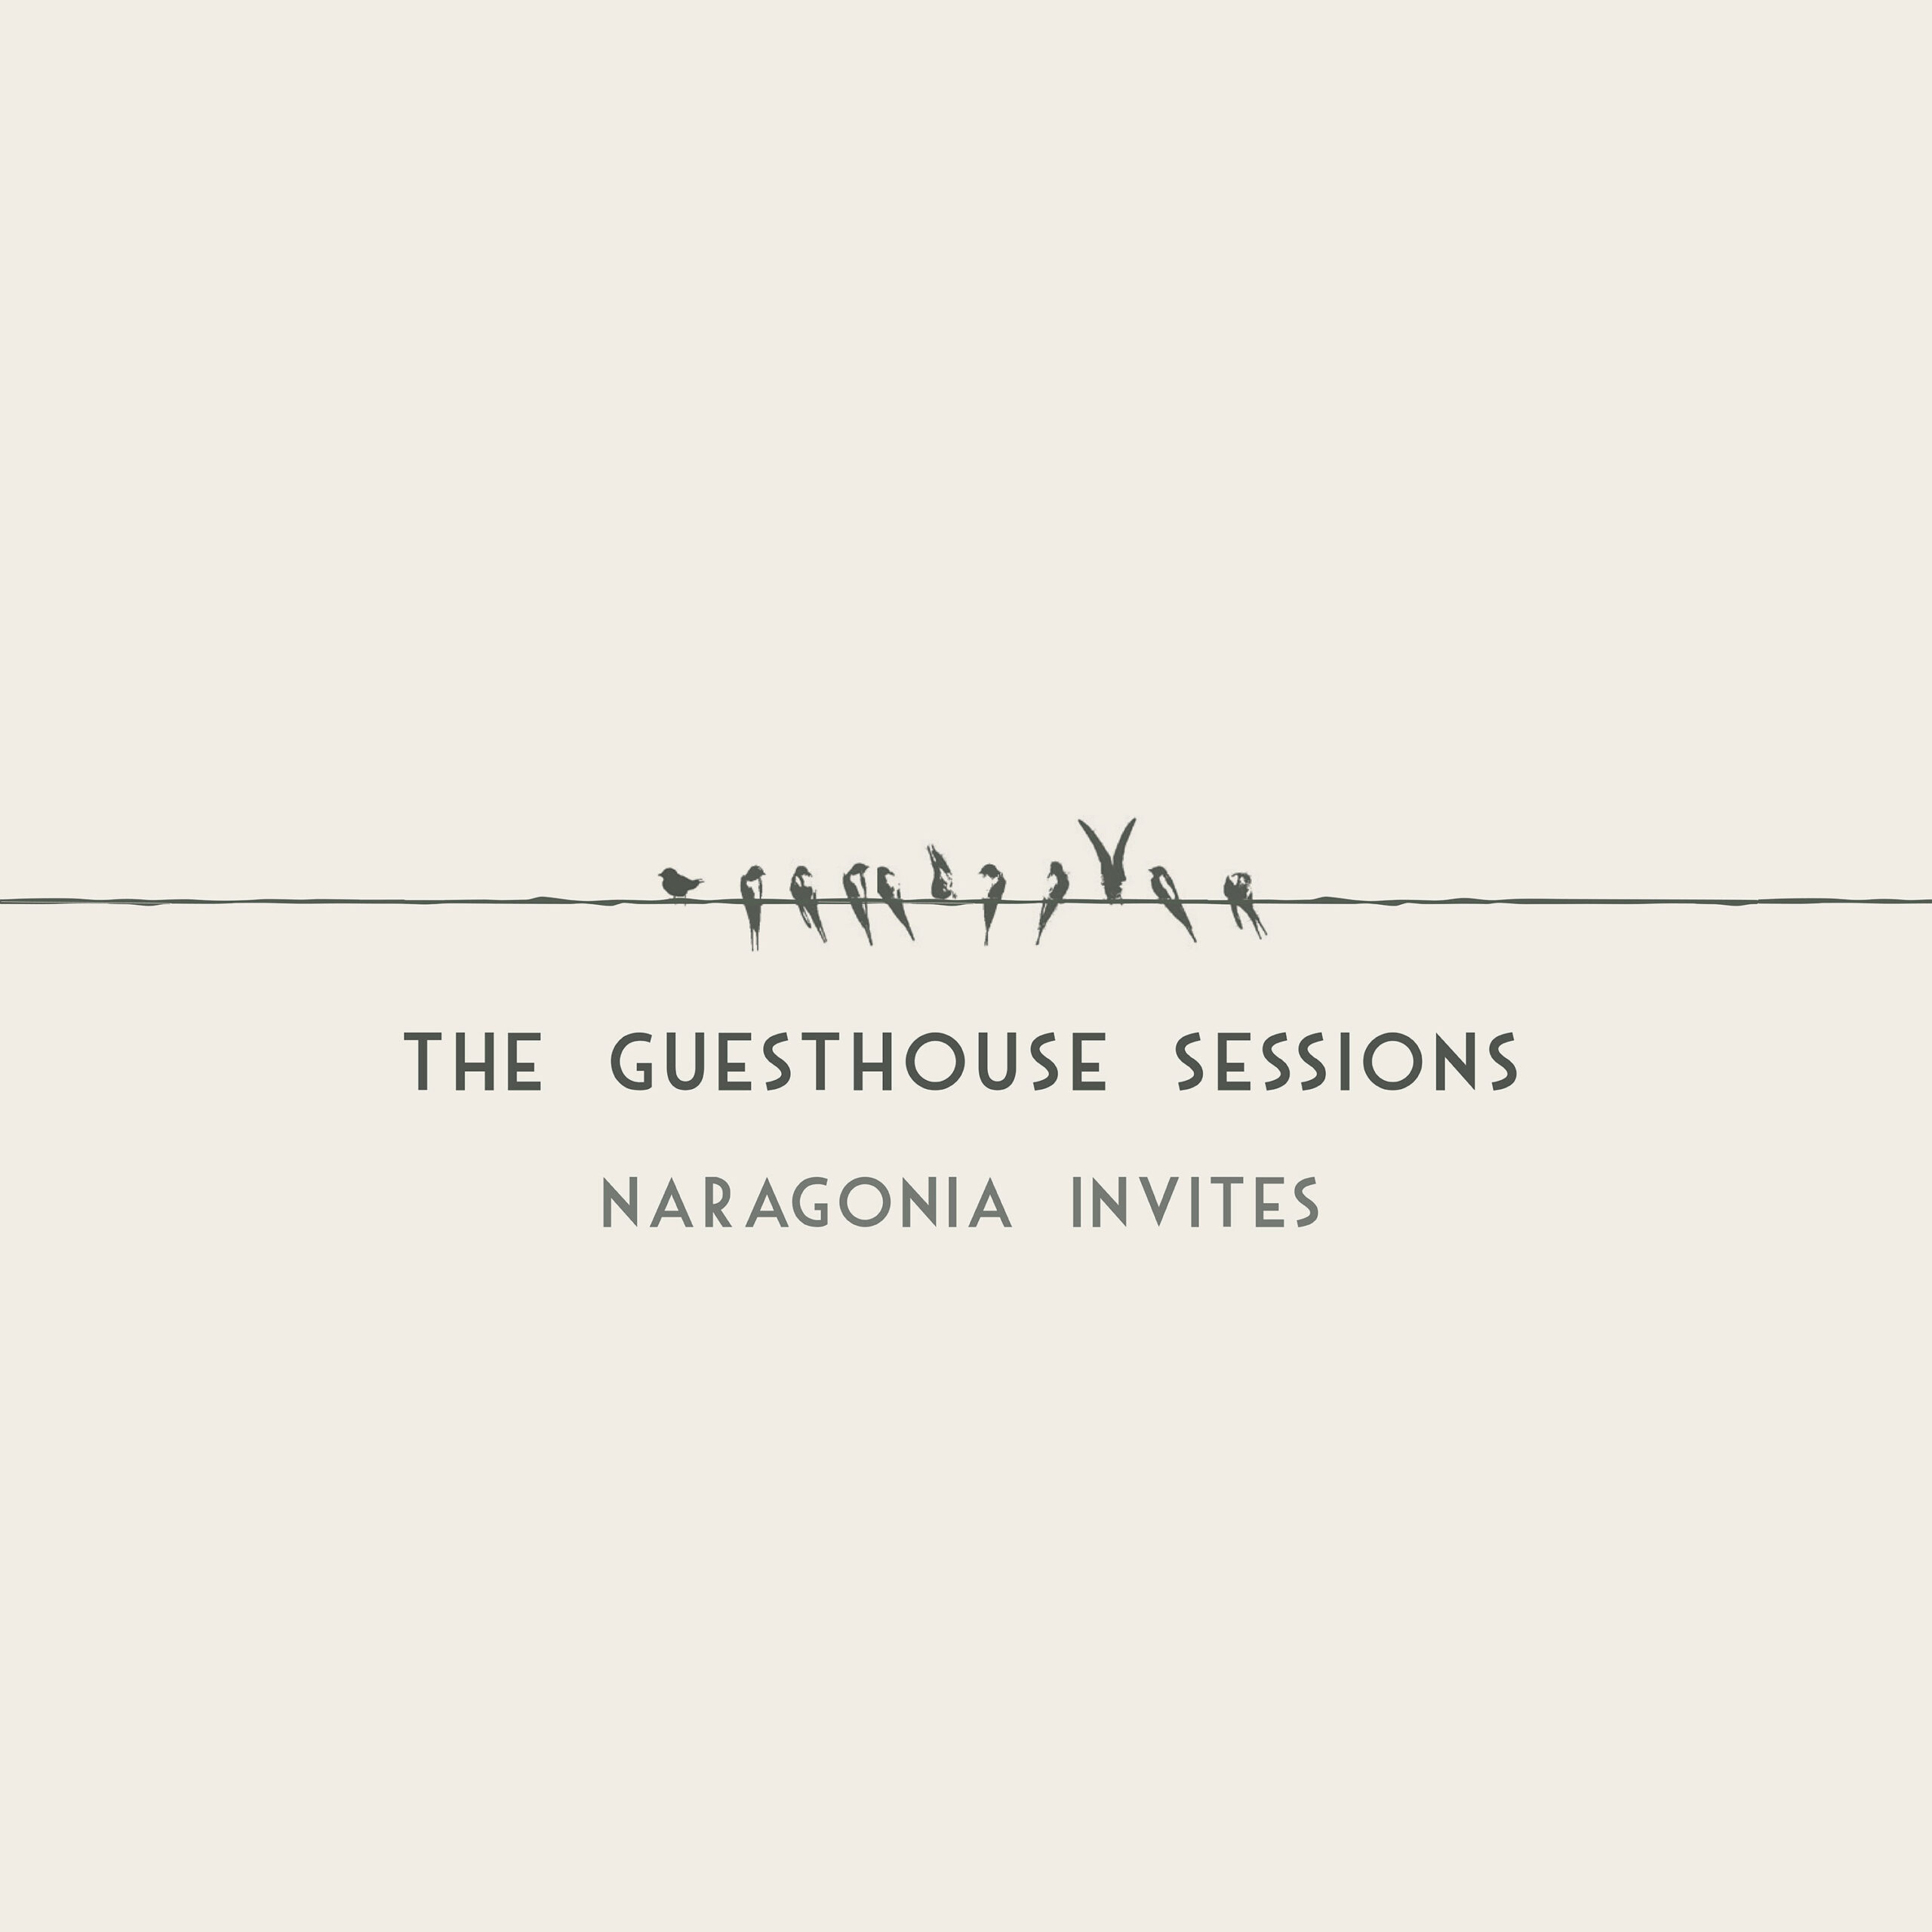 The Guesthouse Sessions